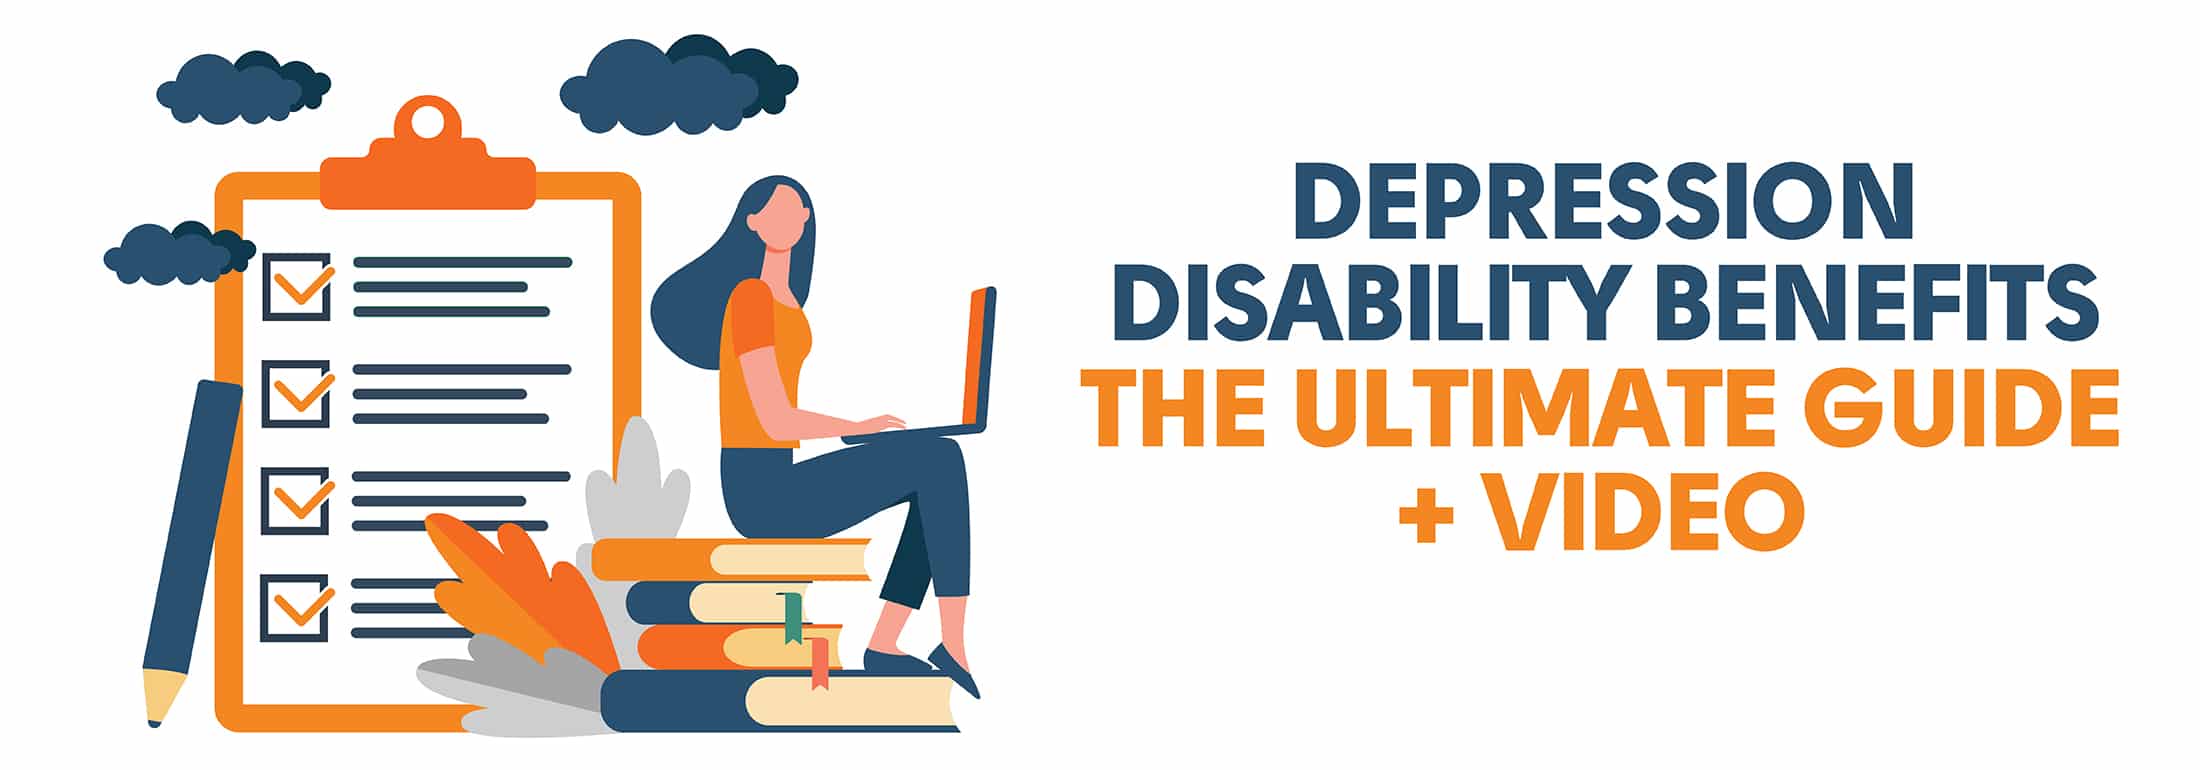 Depression Disability Benefits: The Ultimate Guide ...